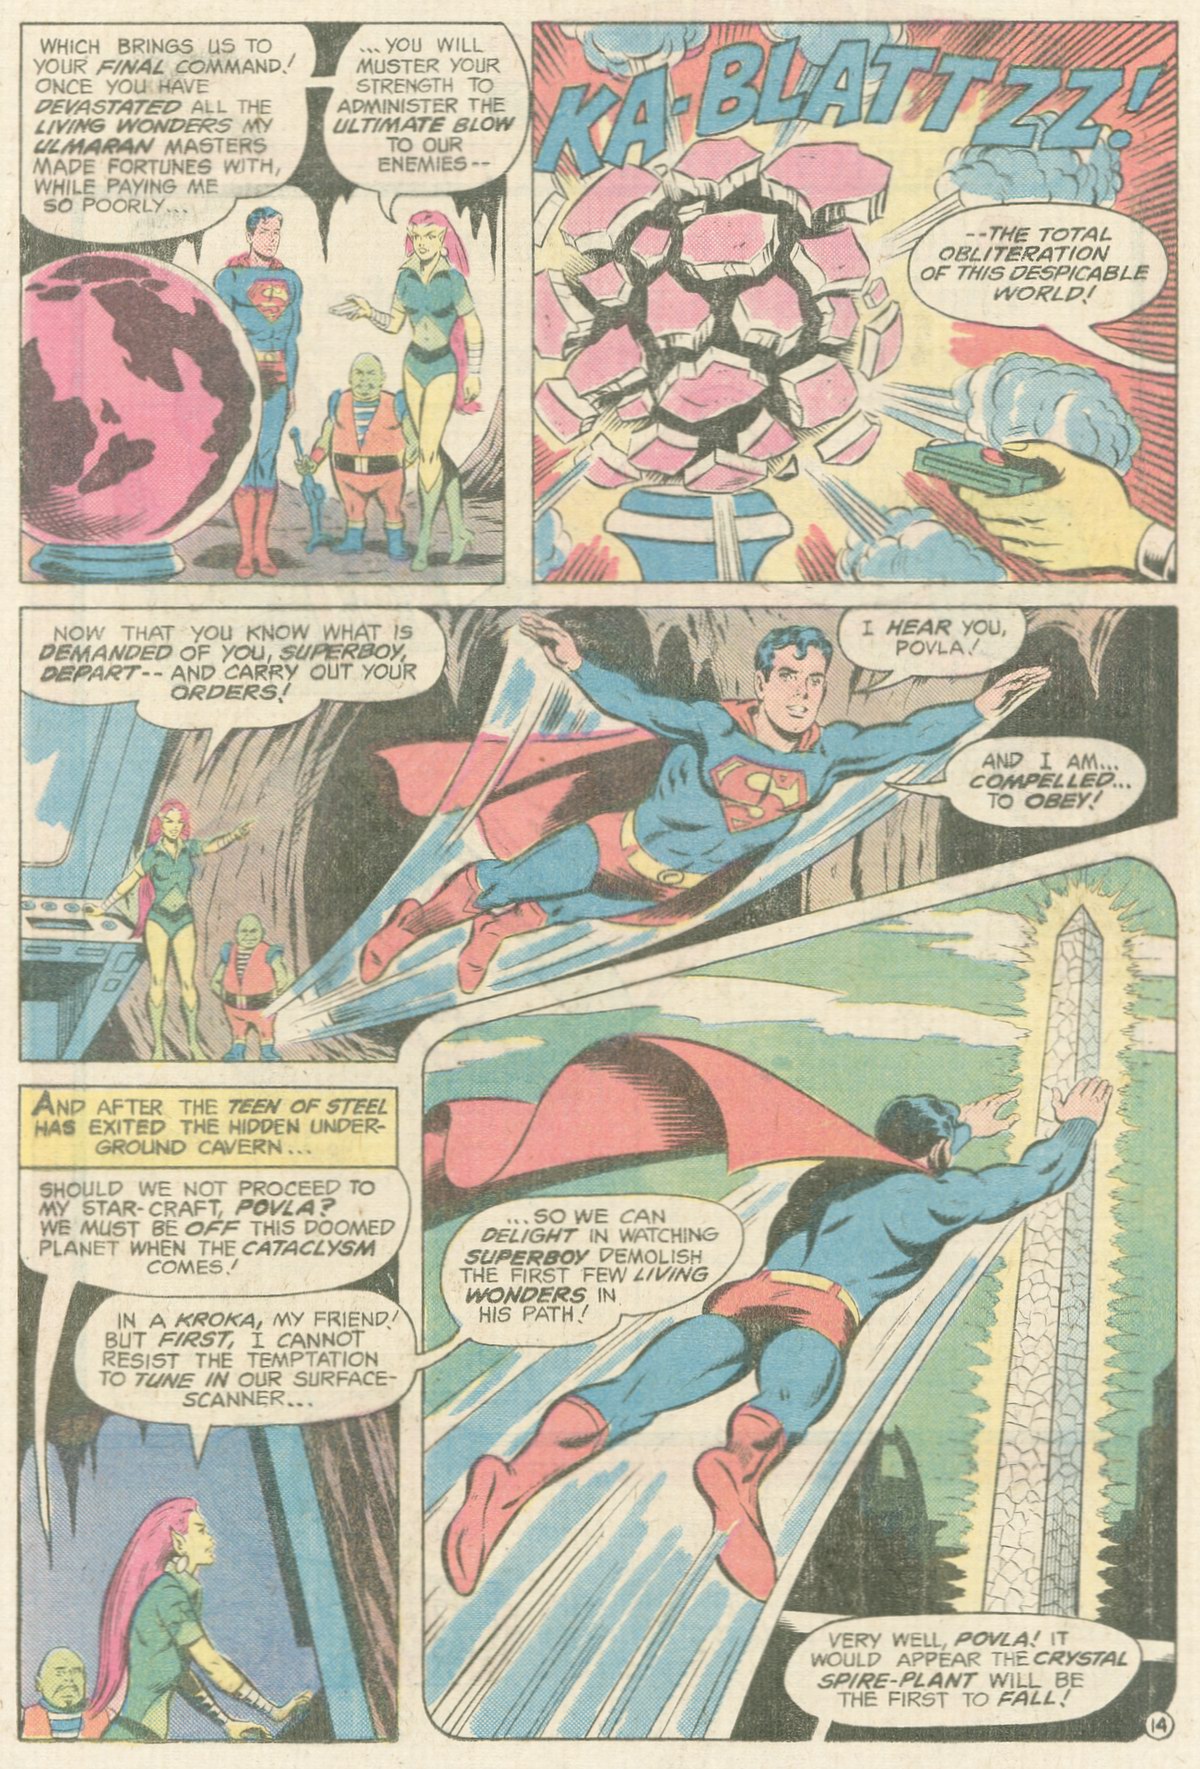 The New Adventures of Superboy 20 Page 14